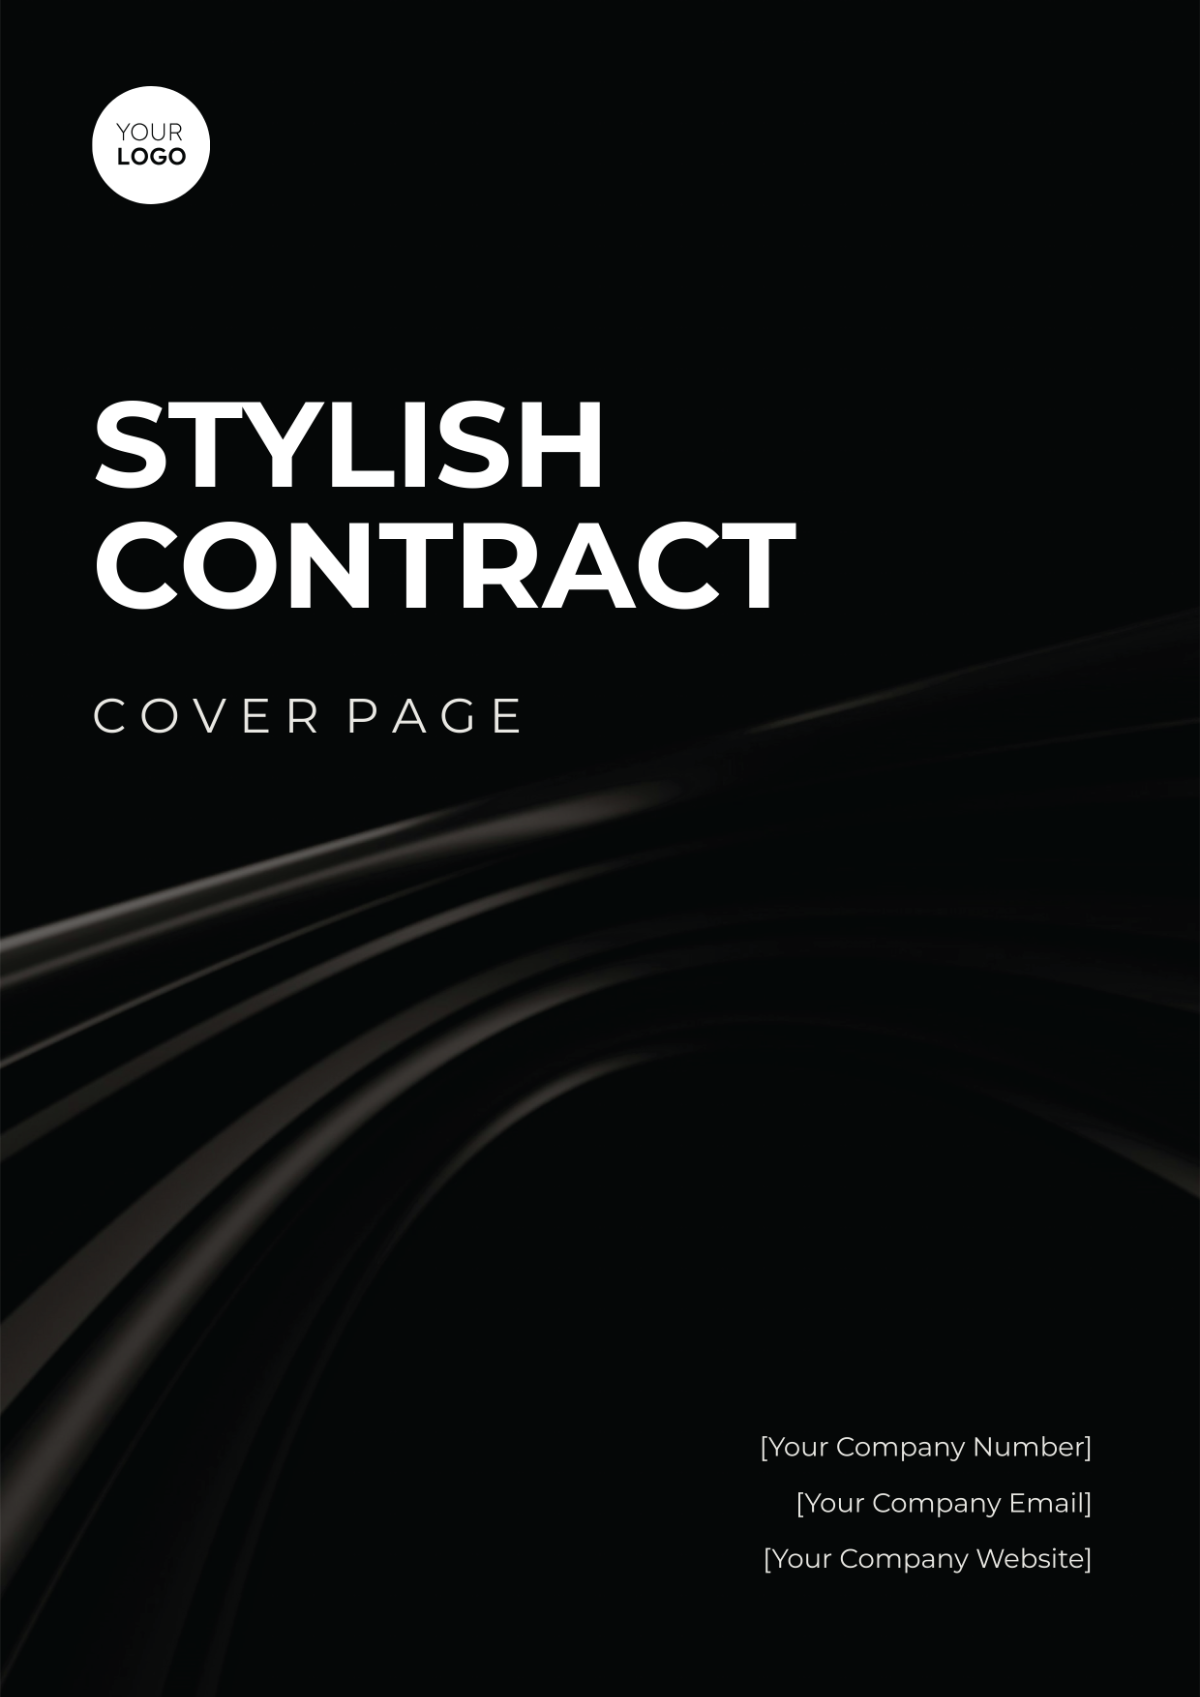 Free Stylish Contract Cover Page Template